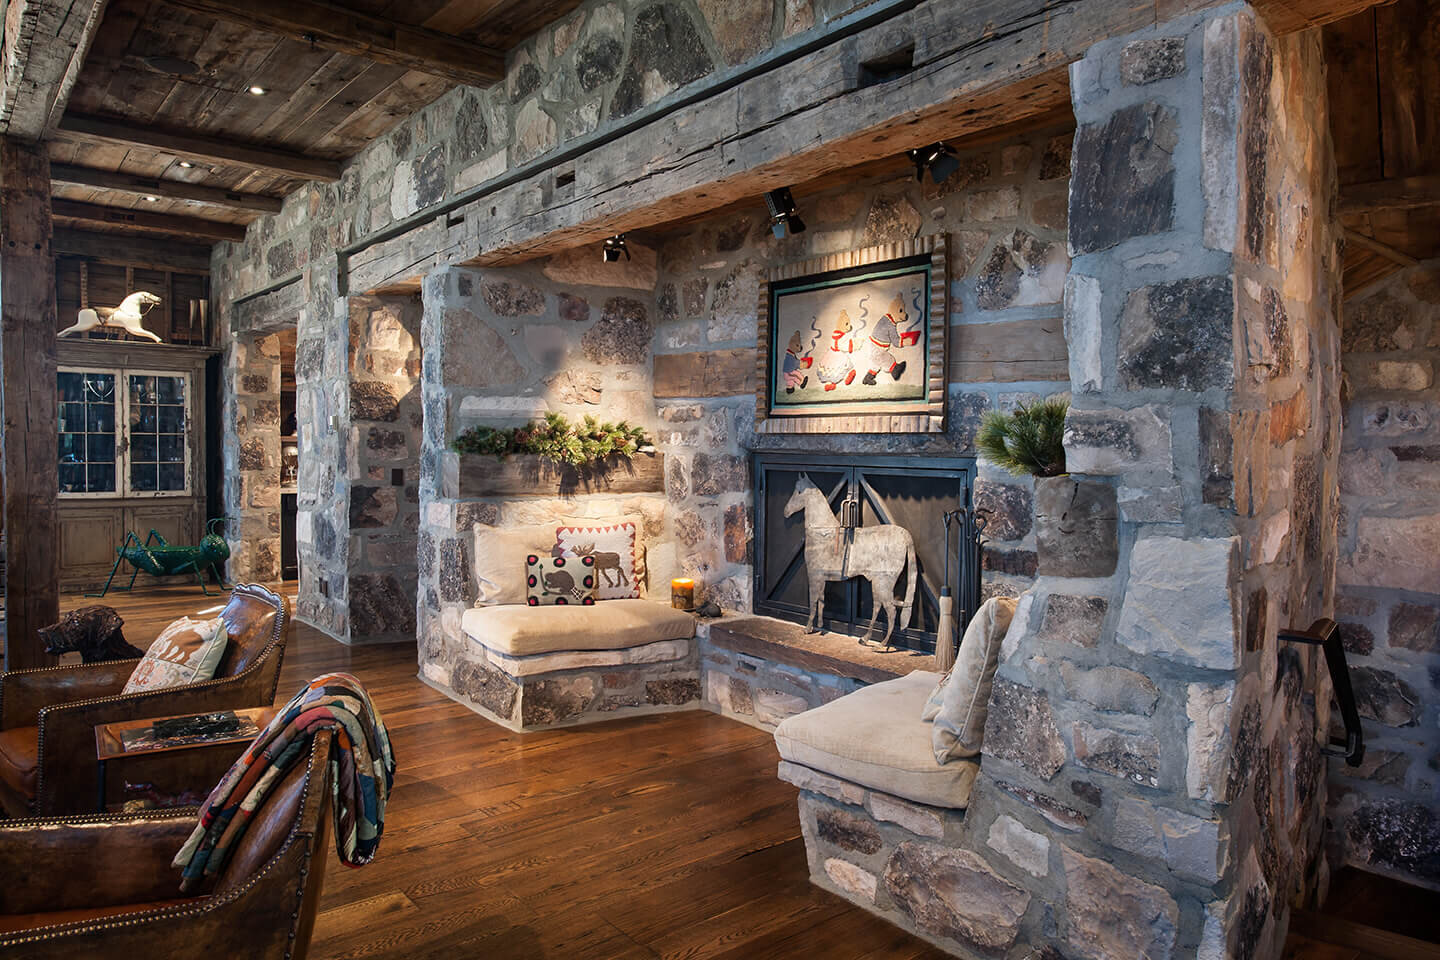 Rustic stone fireplace with sitting area